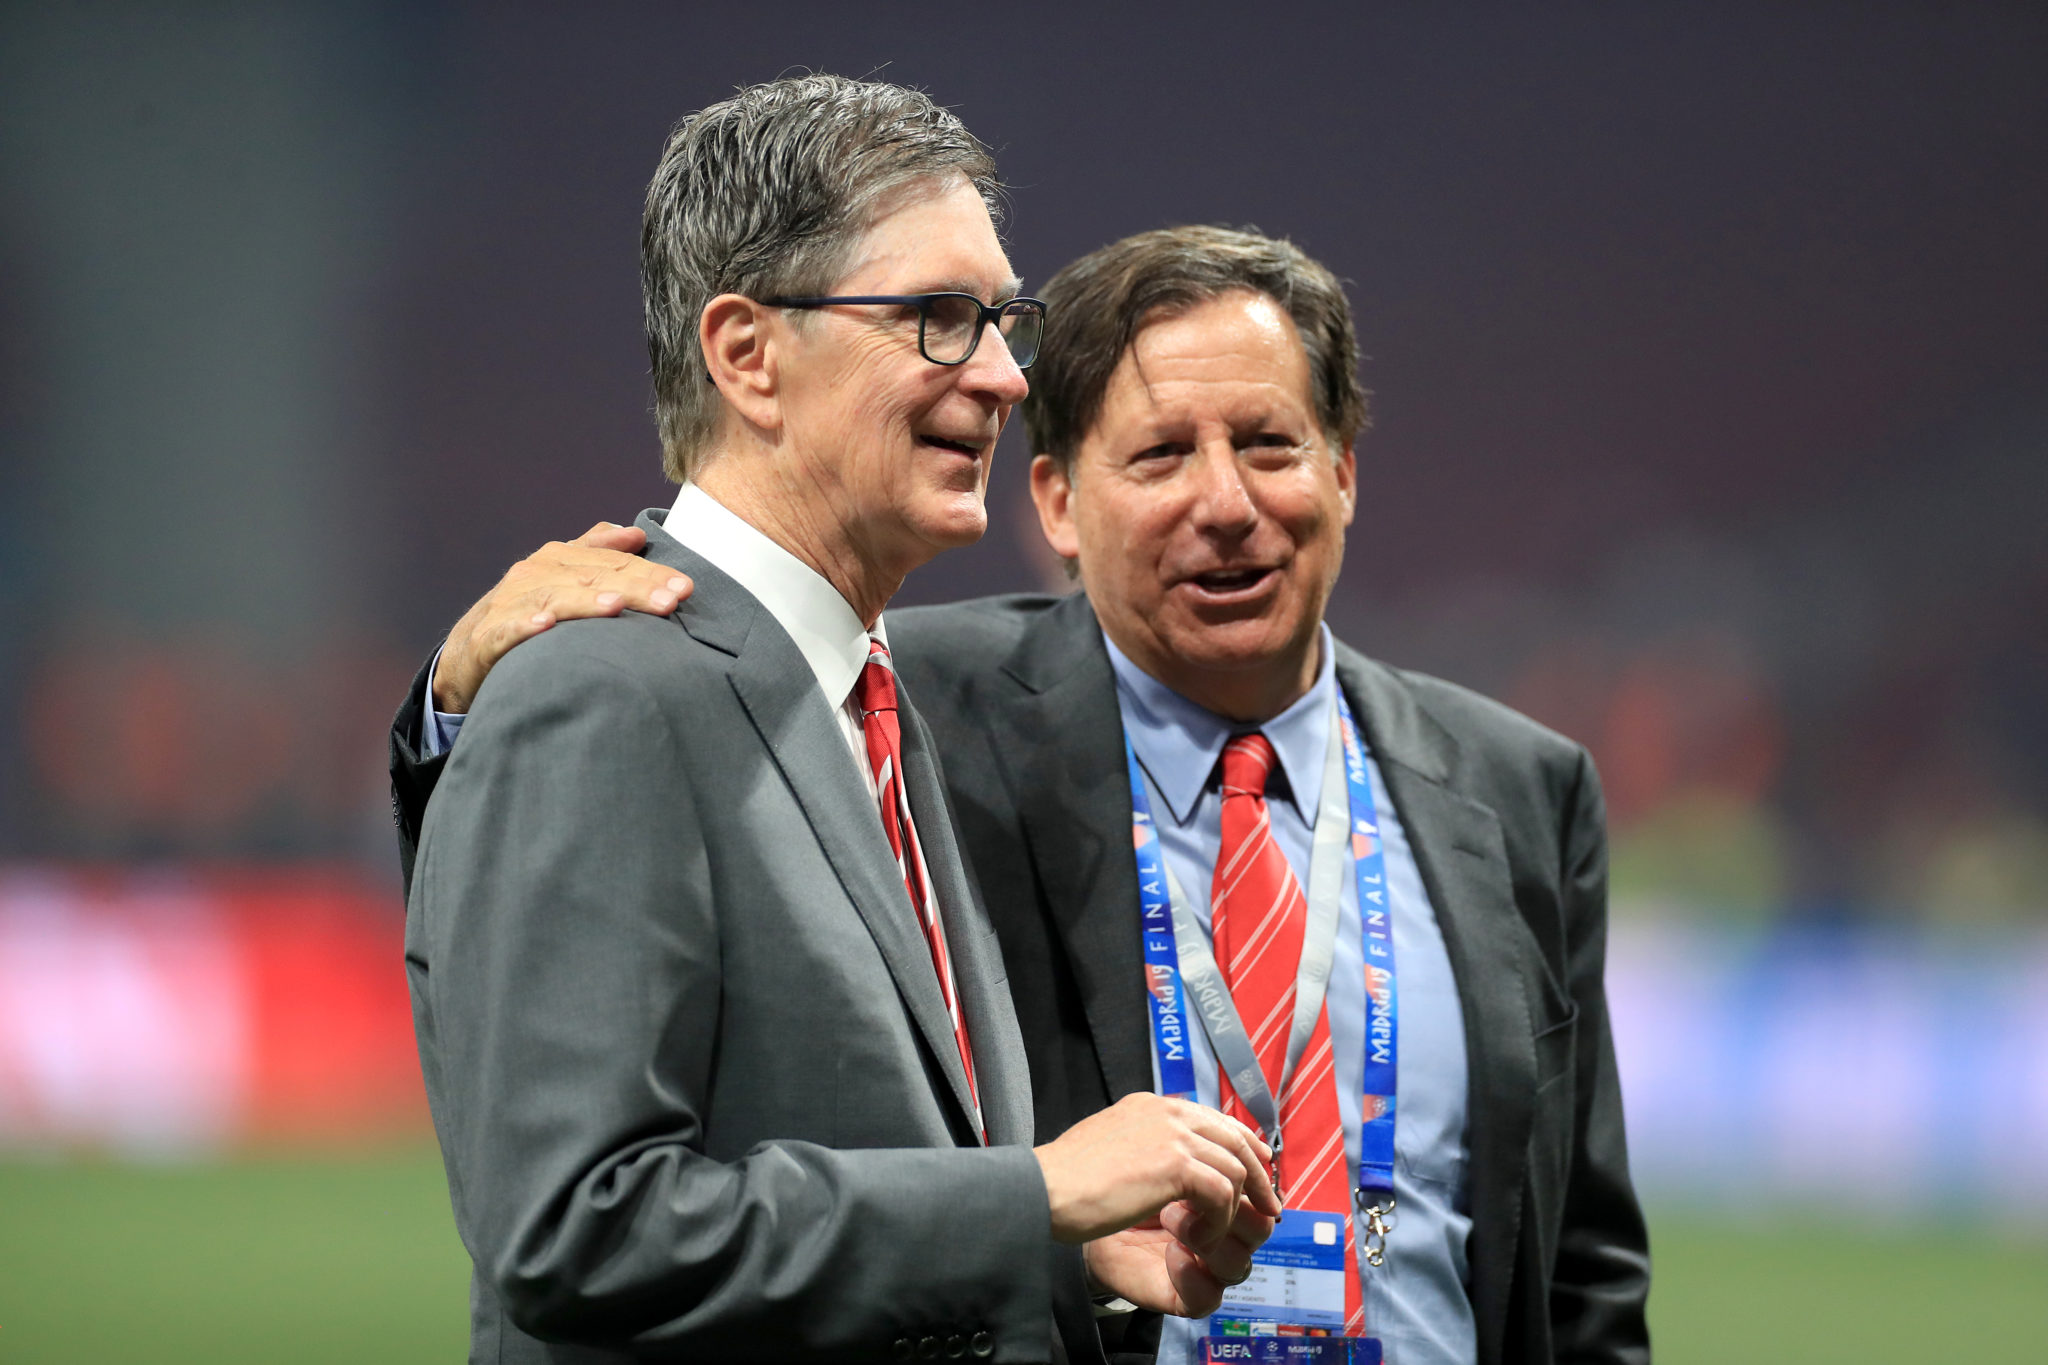 John Henry and Tom Werner after Liverpool have won the Champions League in Madrid